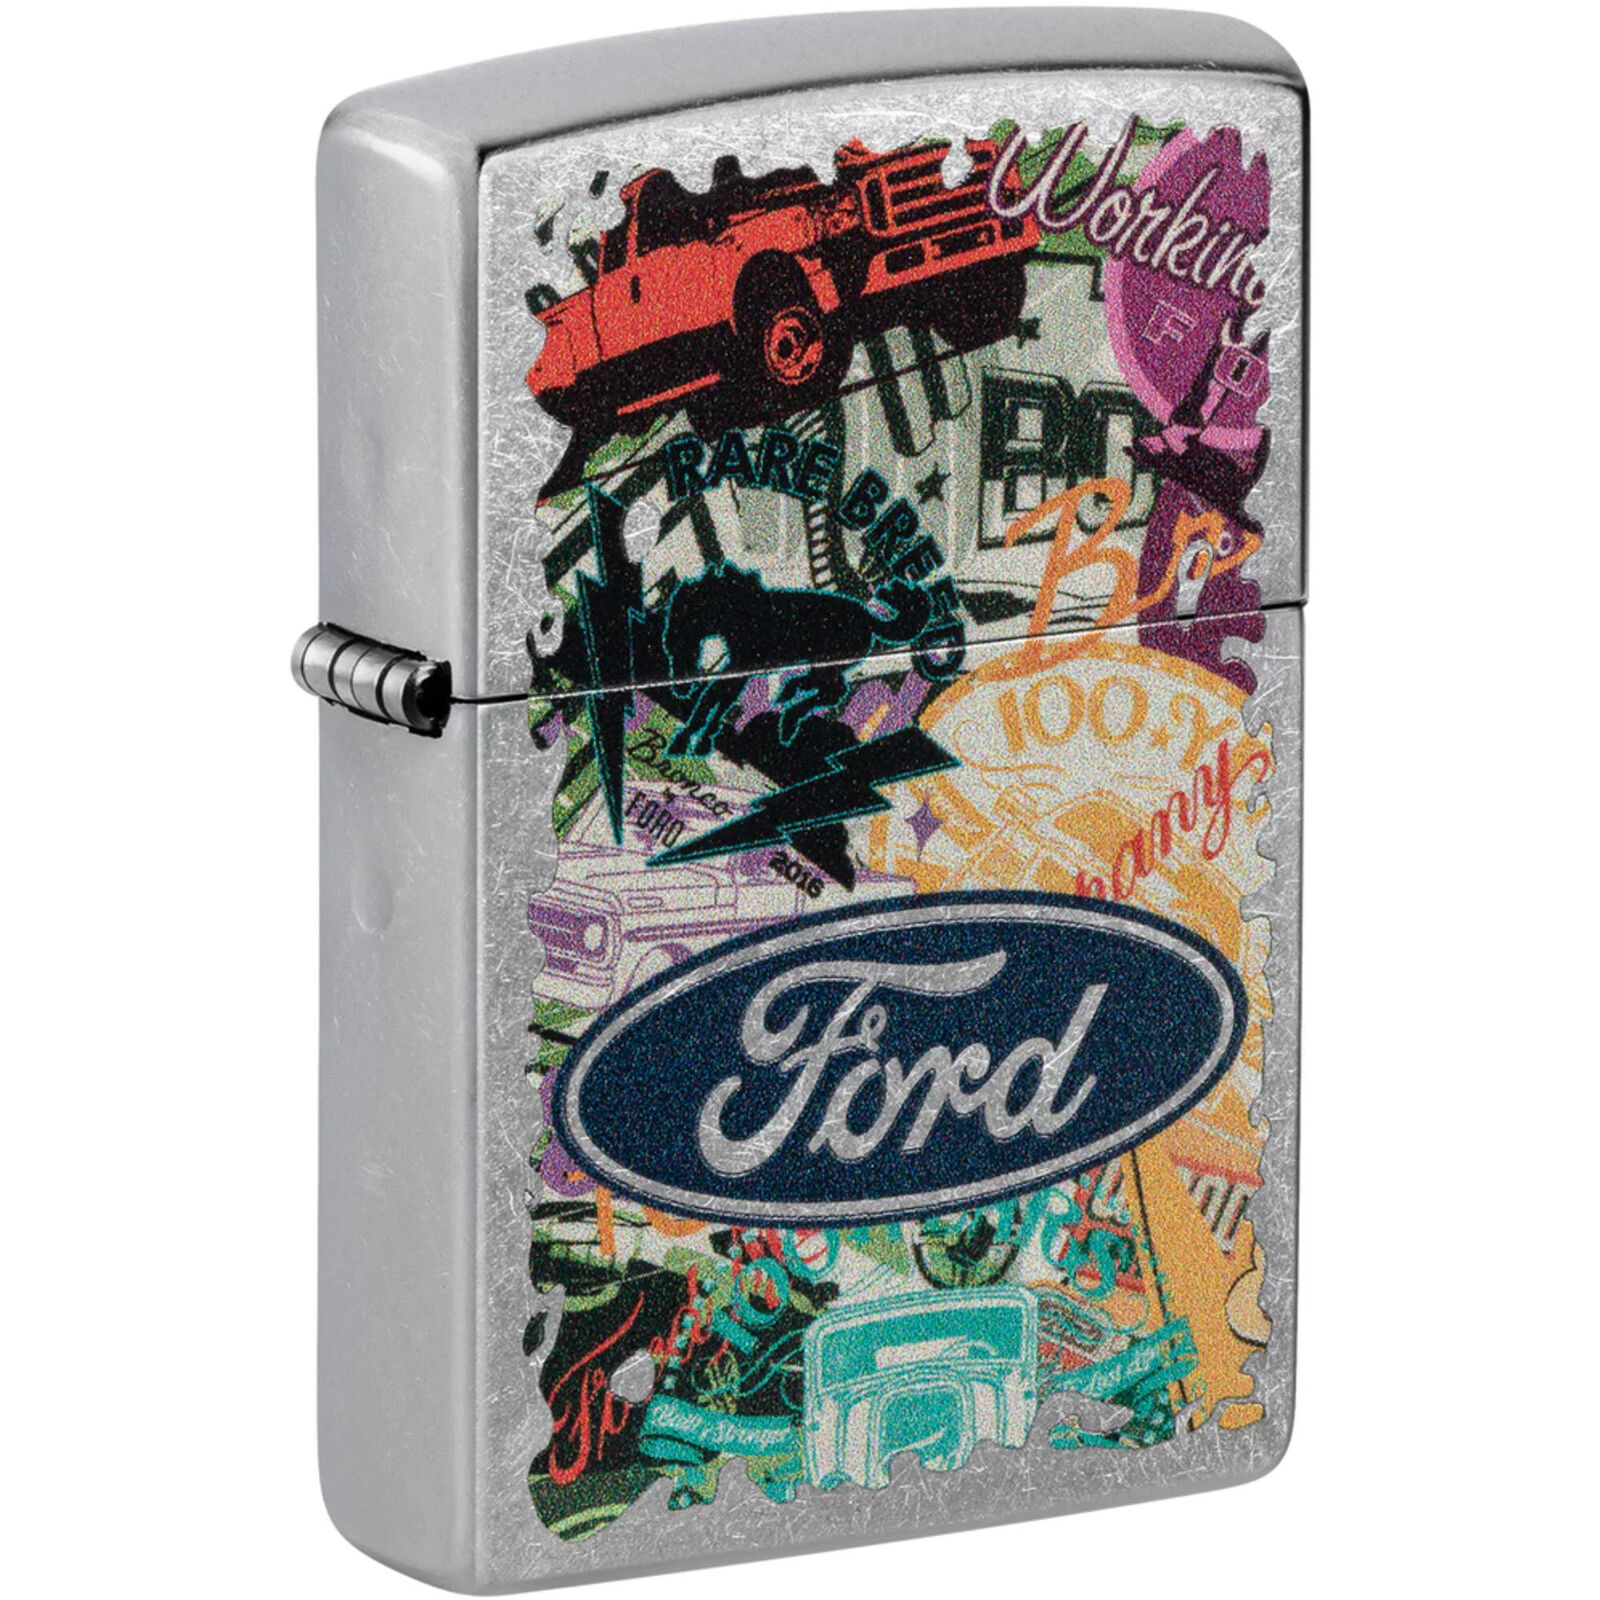 Zippo Windproof Lighter Bold Collage Ford Logo in Color Image Design Metal 48755